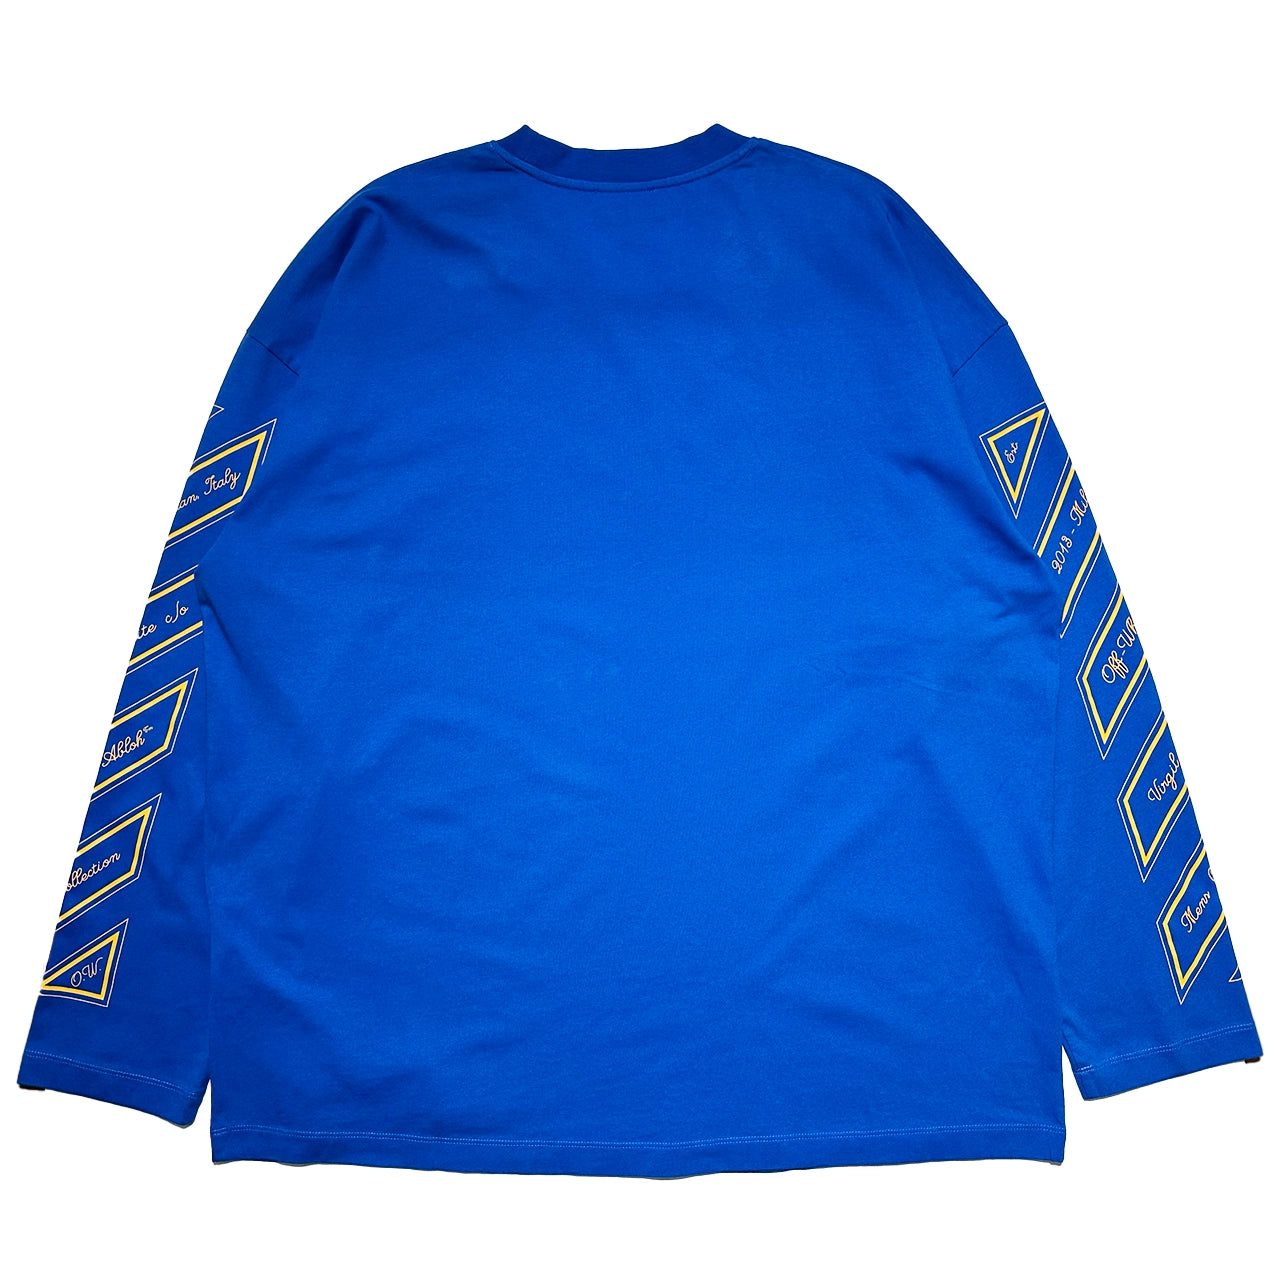 Off-White™ / OW 23 WIDE L/S TEE